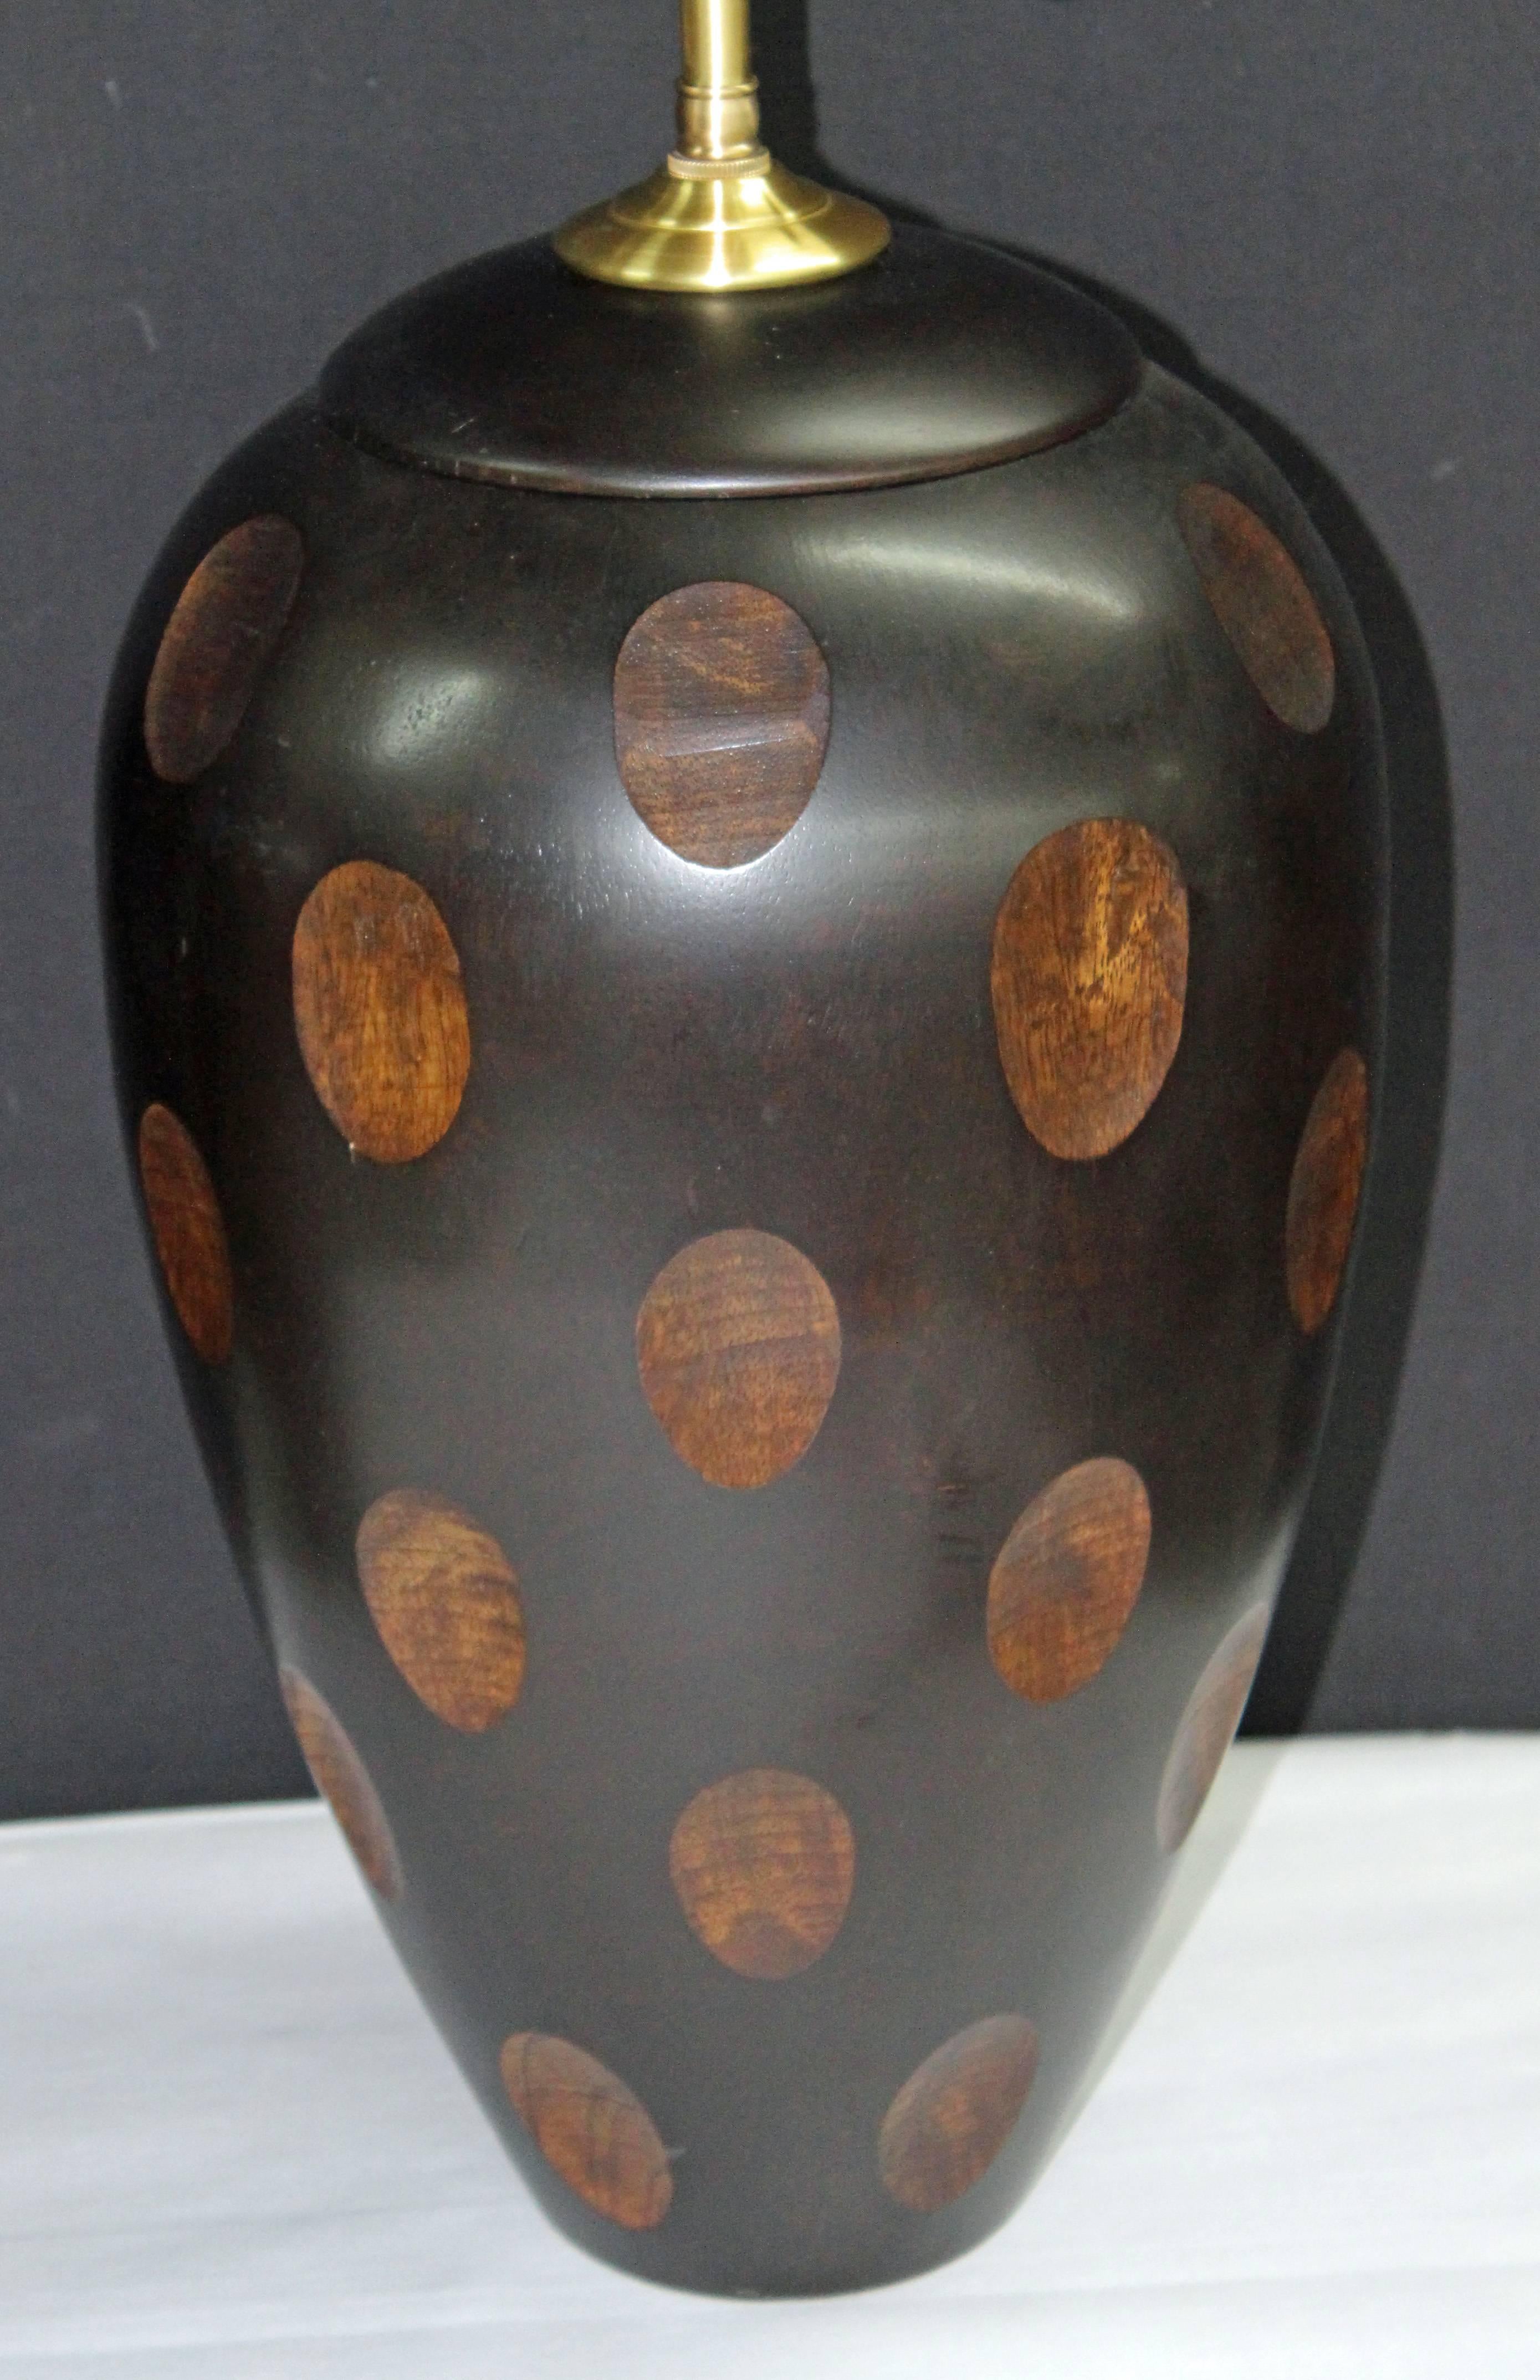 Unusual mahogany vessels with lamp application. The overall finish is espresso with egg shaped 